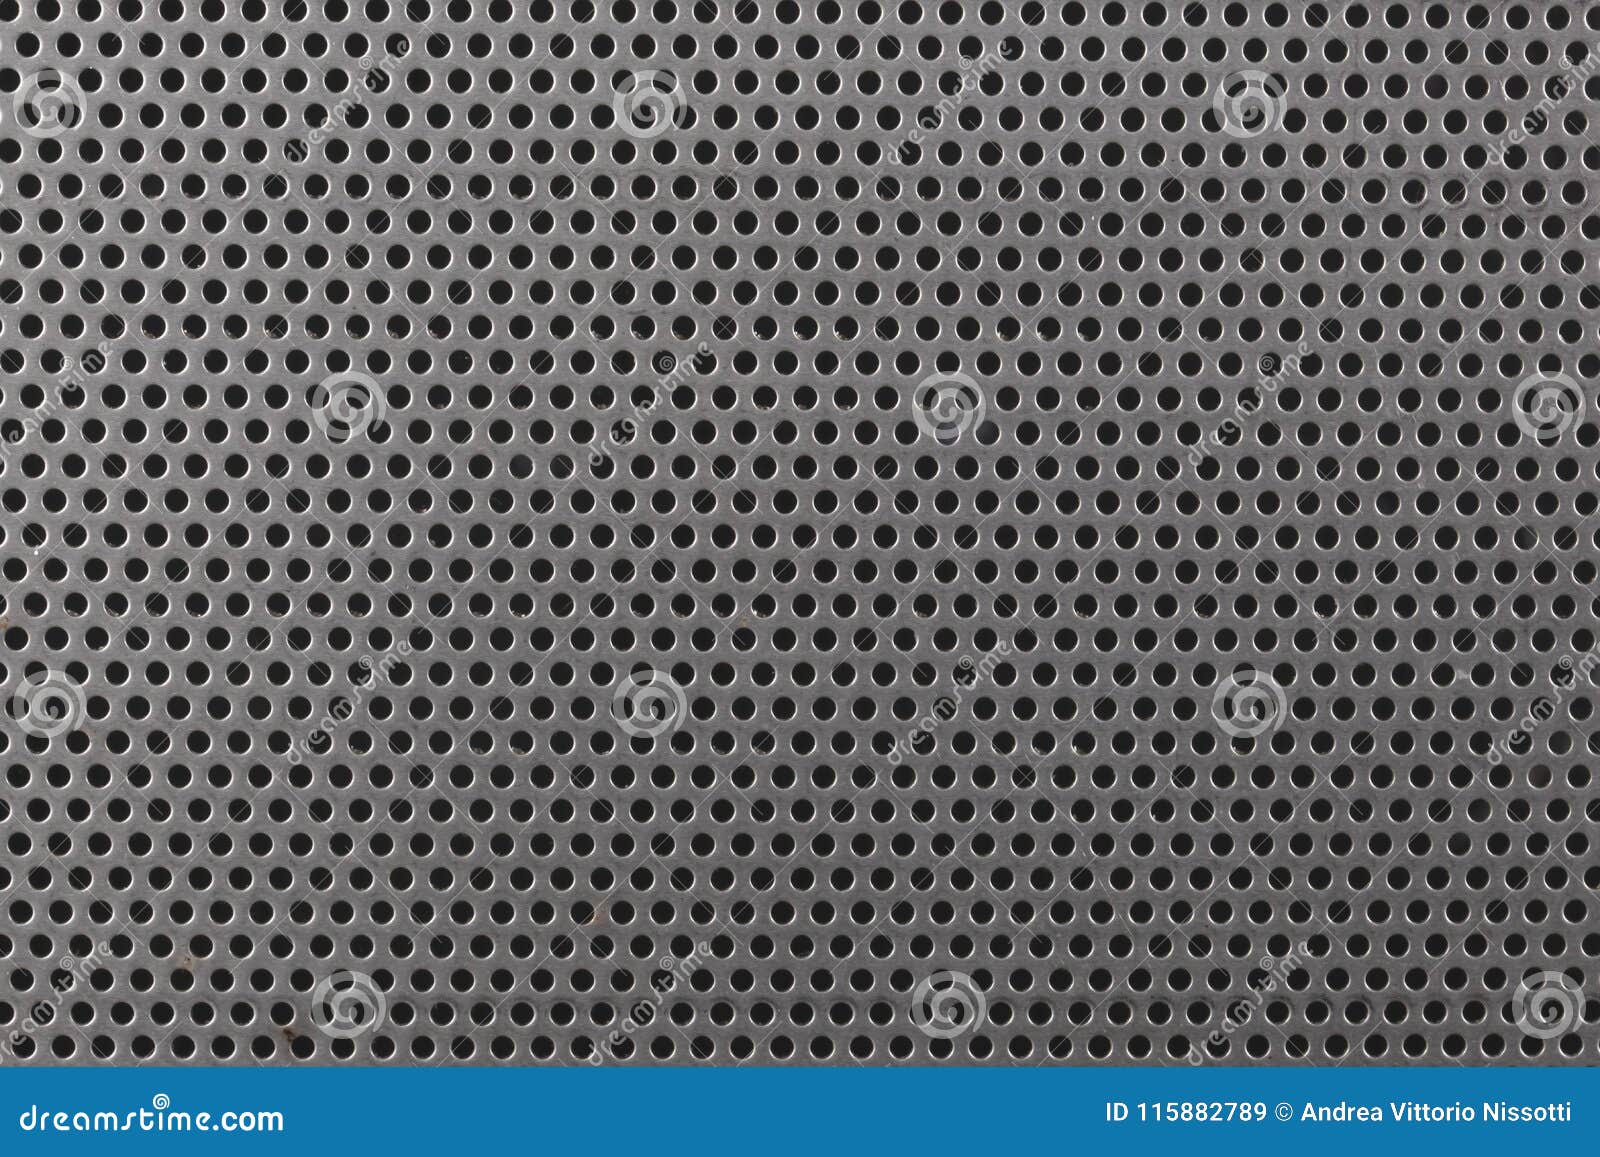 Close Up On A Metallic Texture With Small Holes Stock Image - Image of